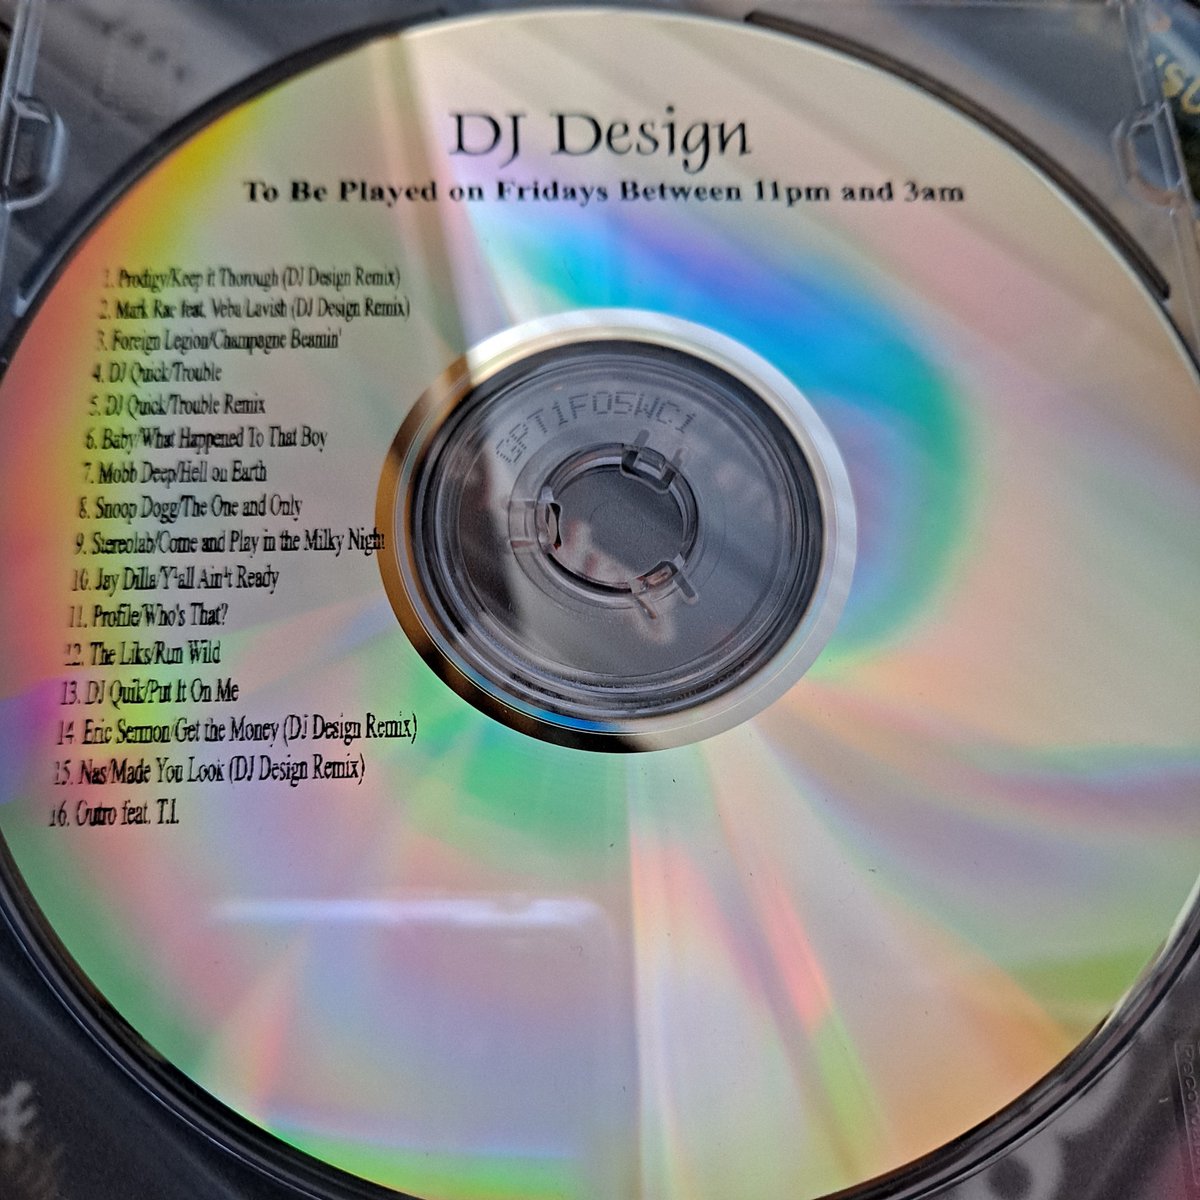 DJ Design - To Be Played On Fridays Between 11pm And 3pm 

#djdesign #remixes #prodigy #foreignlegion #djquick #baby #mobbdeep #snoopdogg #sterolab #jaydilla #theliks #ericksermon #nas #hiphop #mixtape 

@DJDesign90